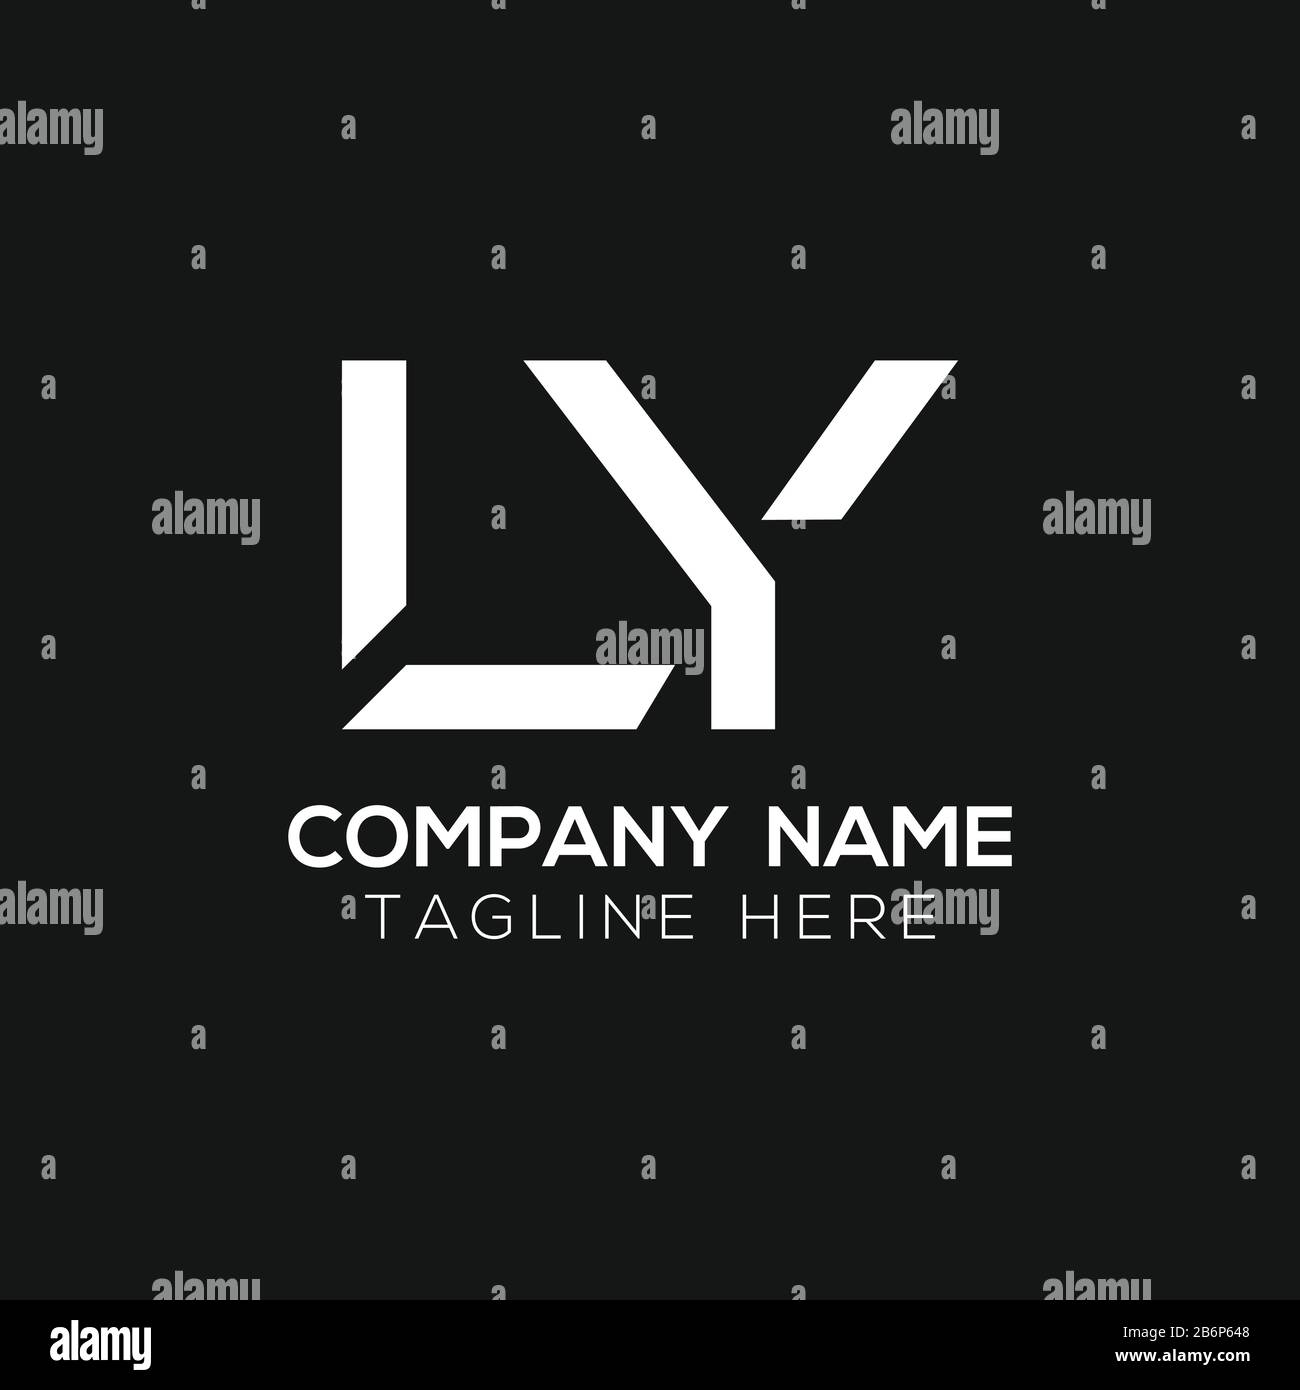 L y logo Black and White Stock Photos & Images - Alamy